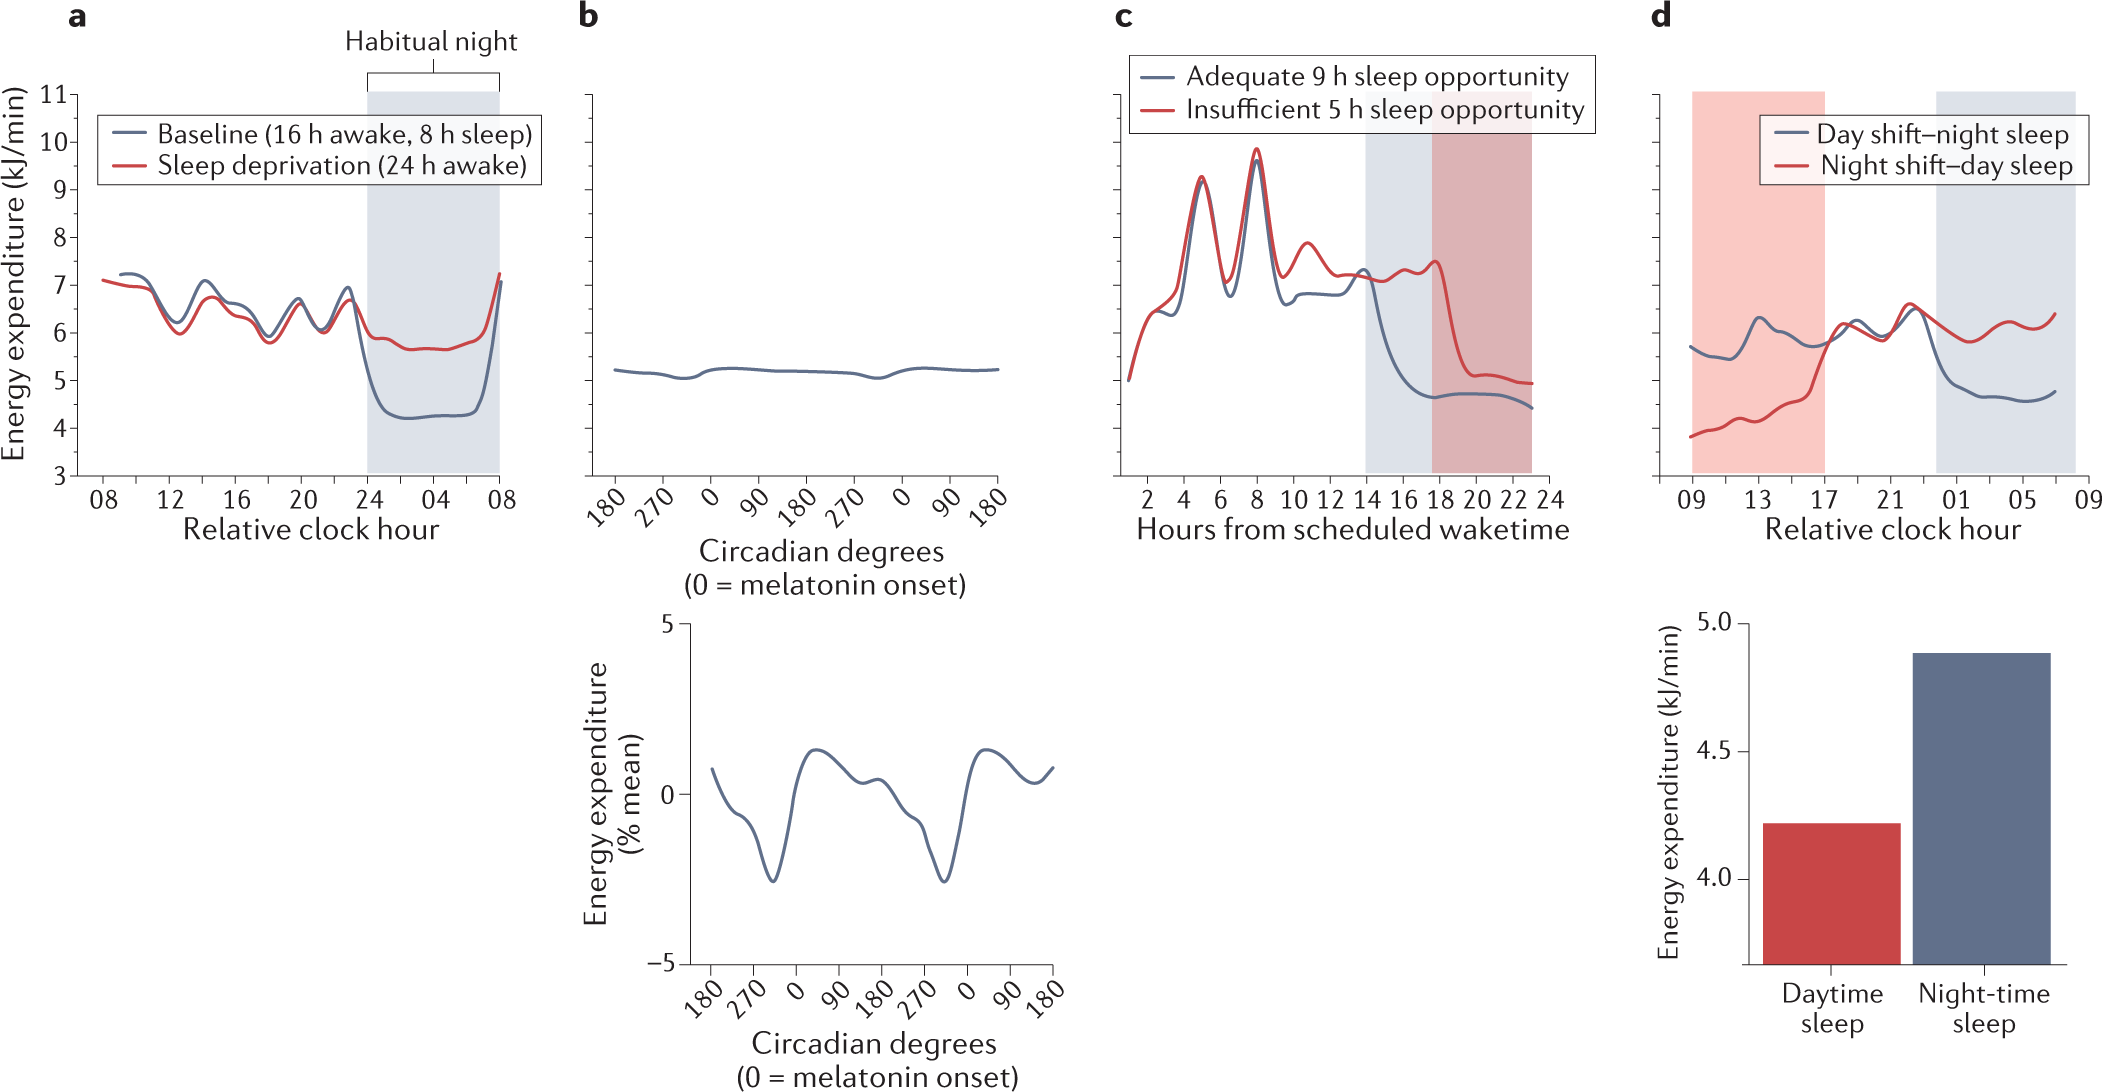 The role of insufficient sleep and circadian misalignment in obesity |  Nature Reviews Endocrinology